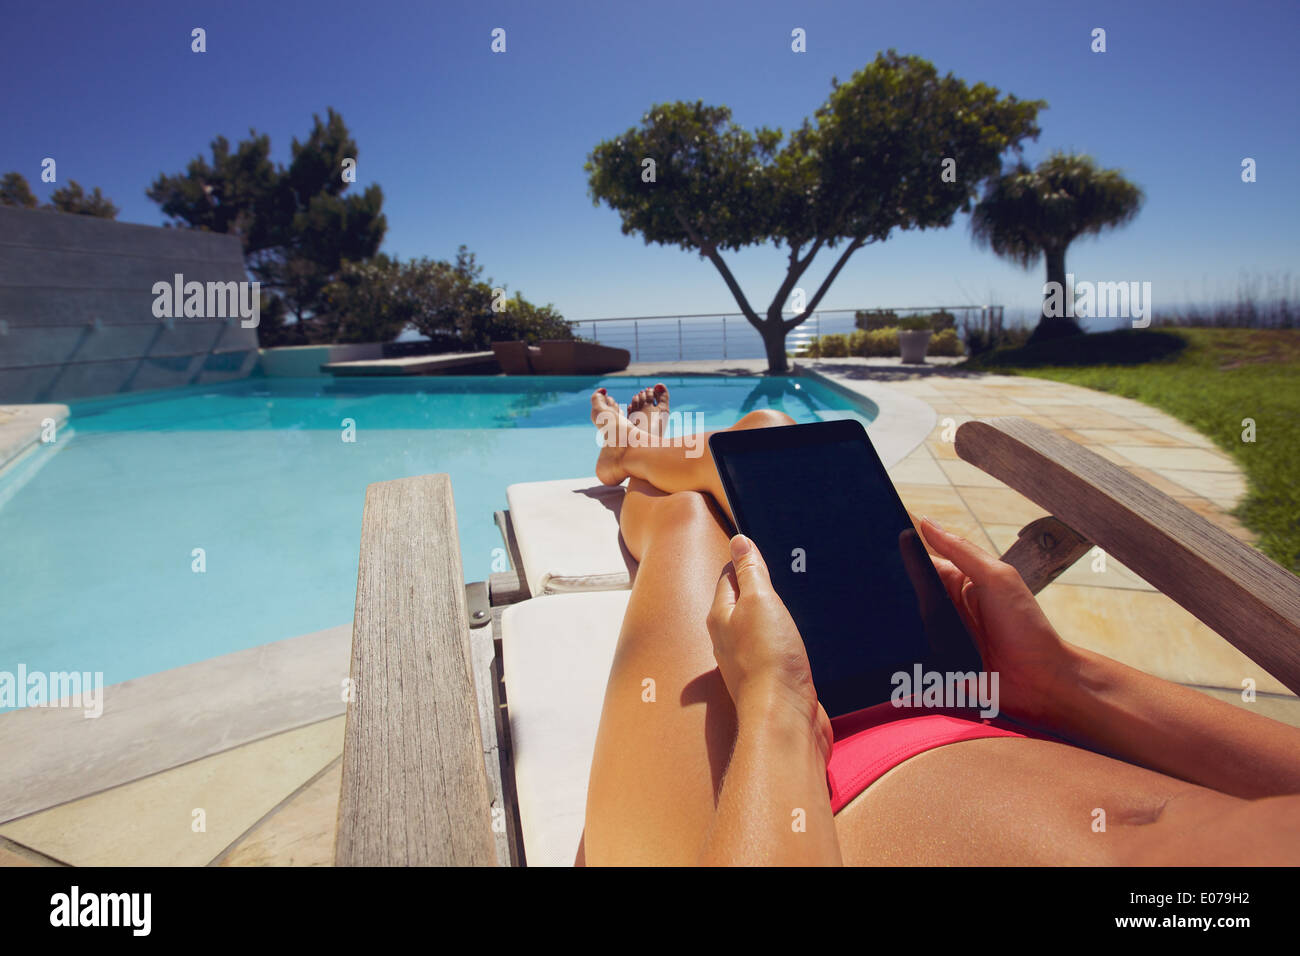 Relaxed woman using digital tablet by the swimming pool. Tanned female model sunbathing and holding tablet PC at poolside. Stock Photo